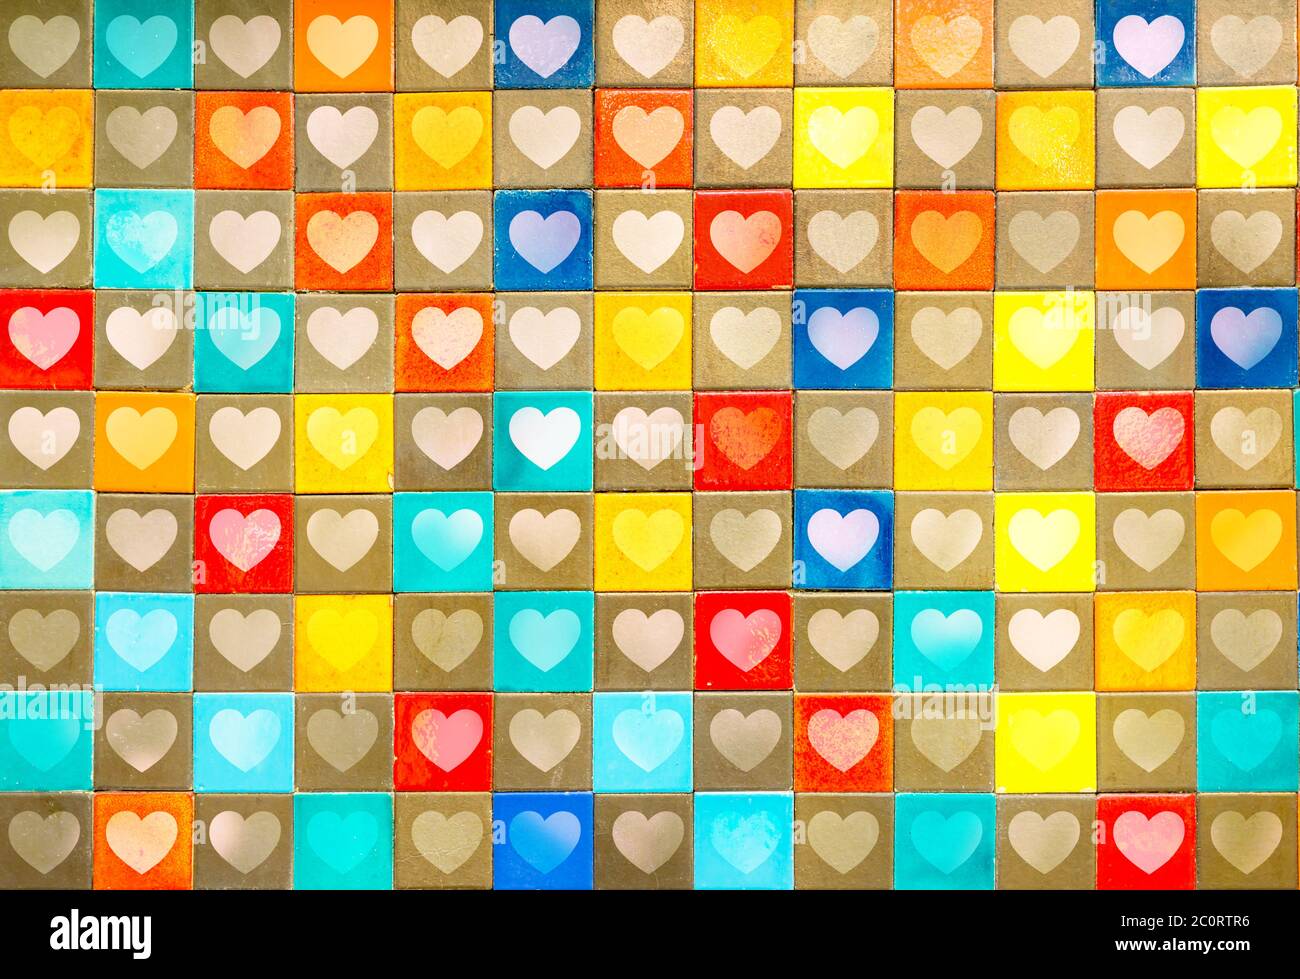 White Hearts on vintage style ceramic tiles wall decoration background,  valentines day background Stock Photo